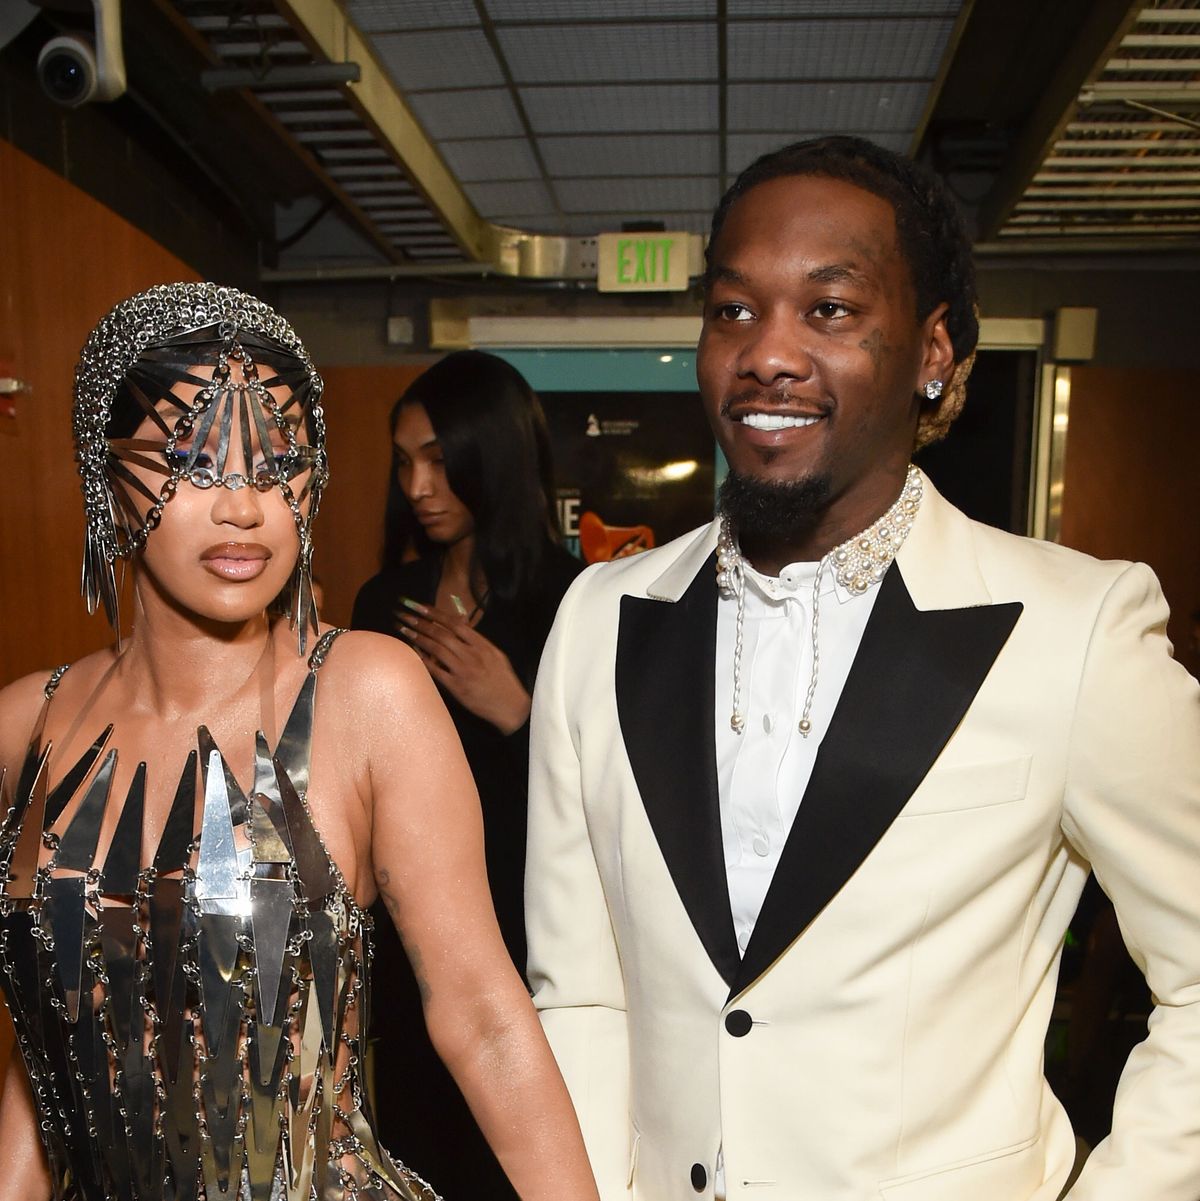 Grammy Awards 2023: Cardi B wows in busty cut-out blue gown